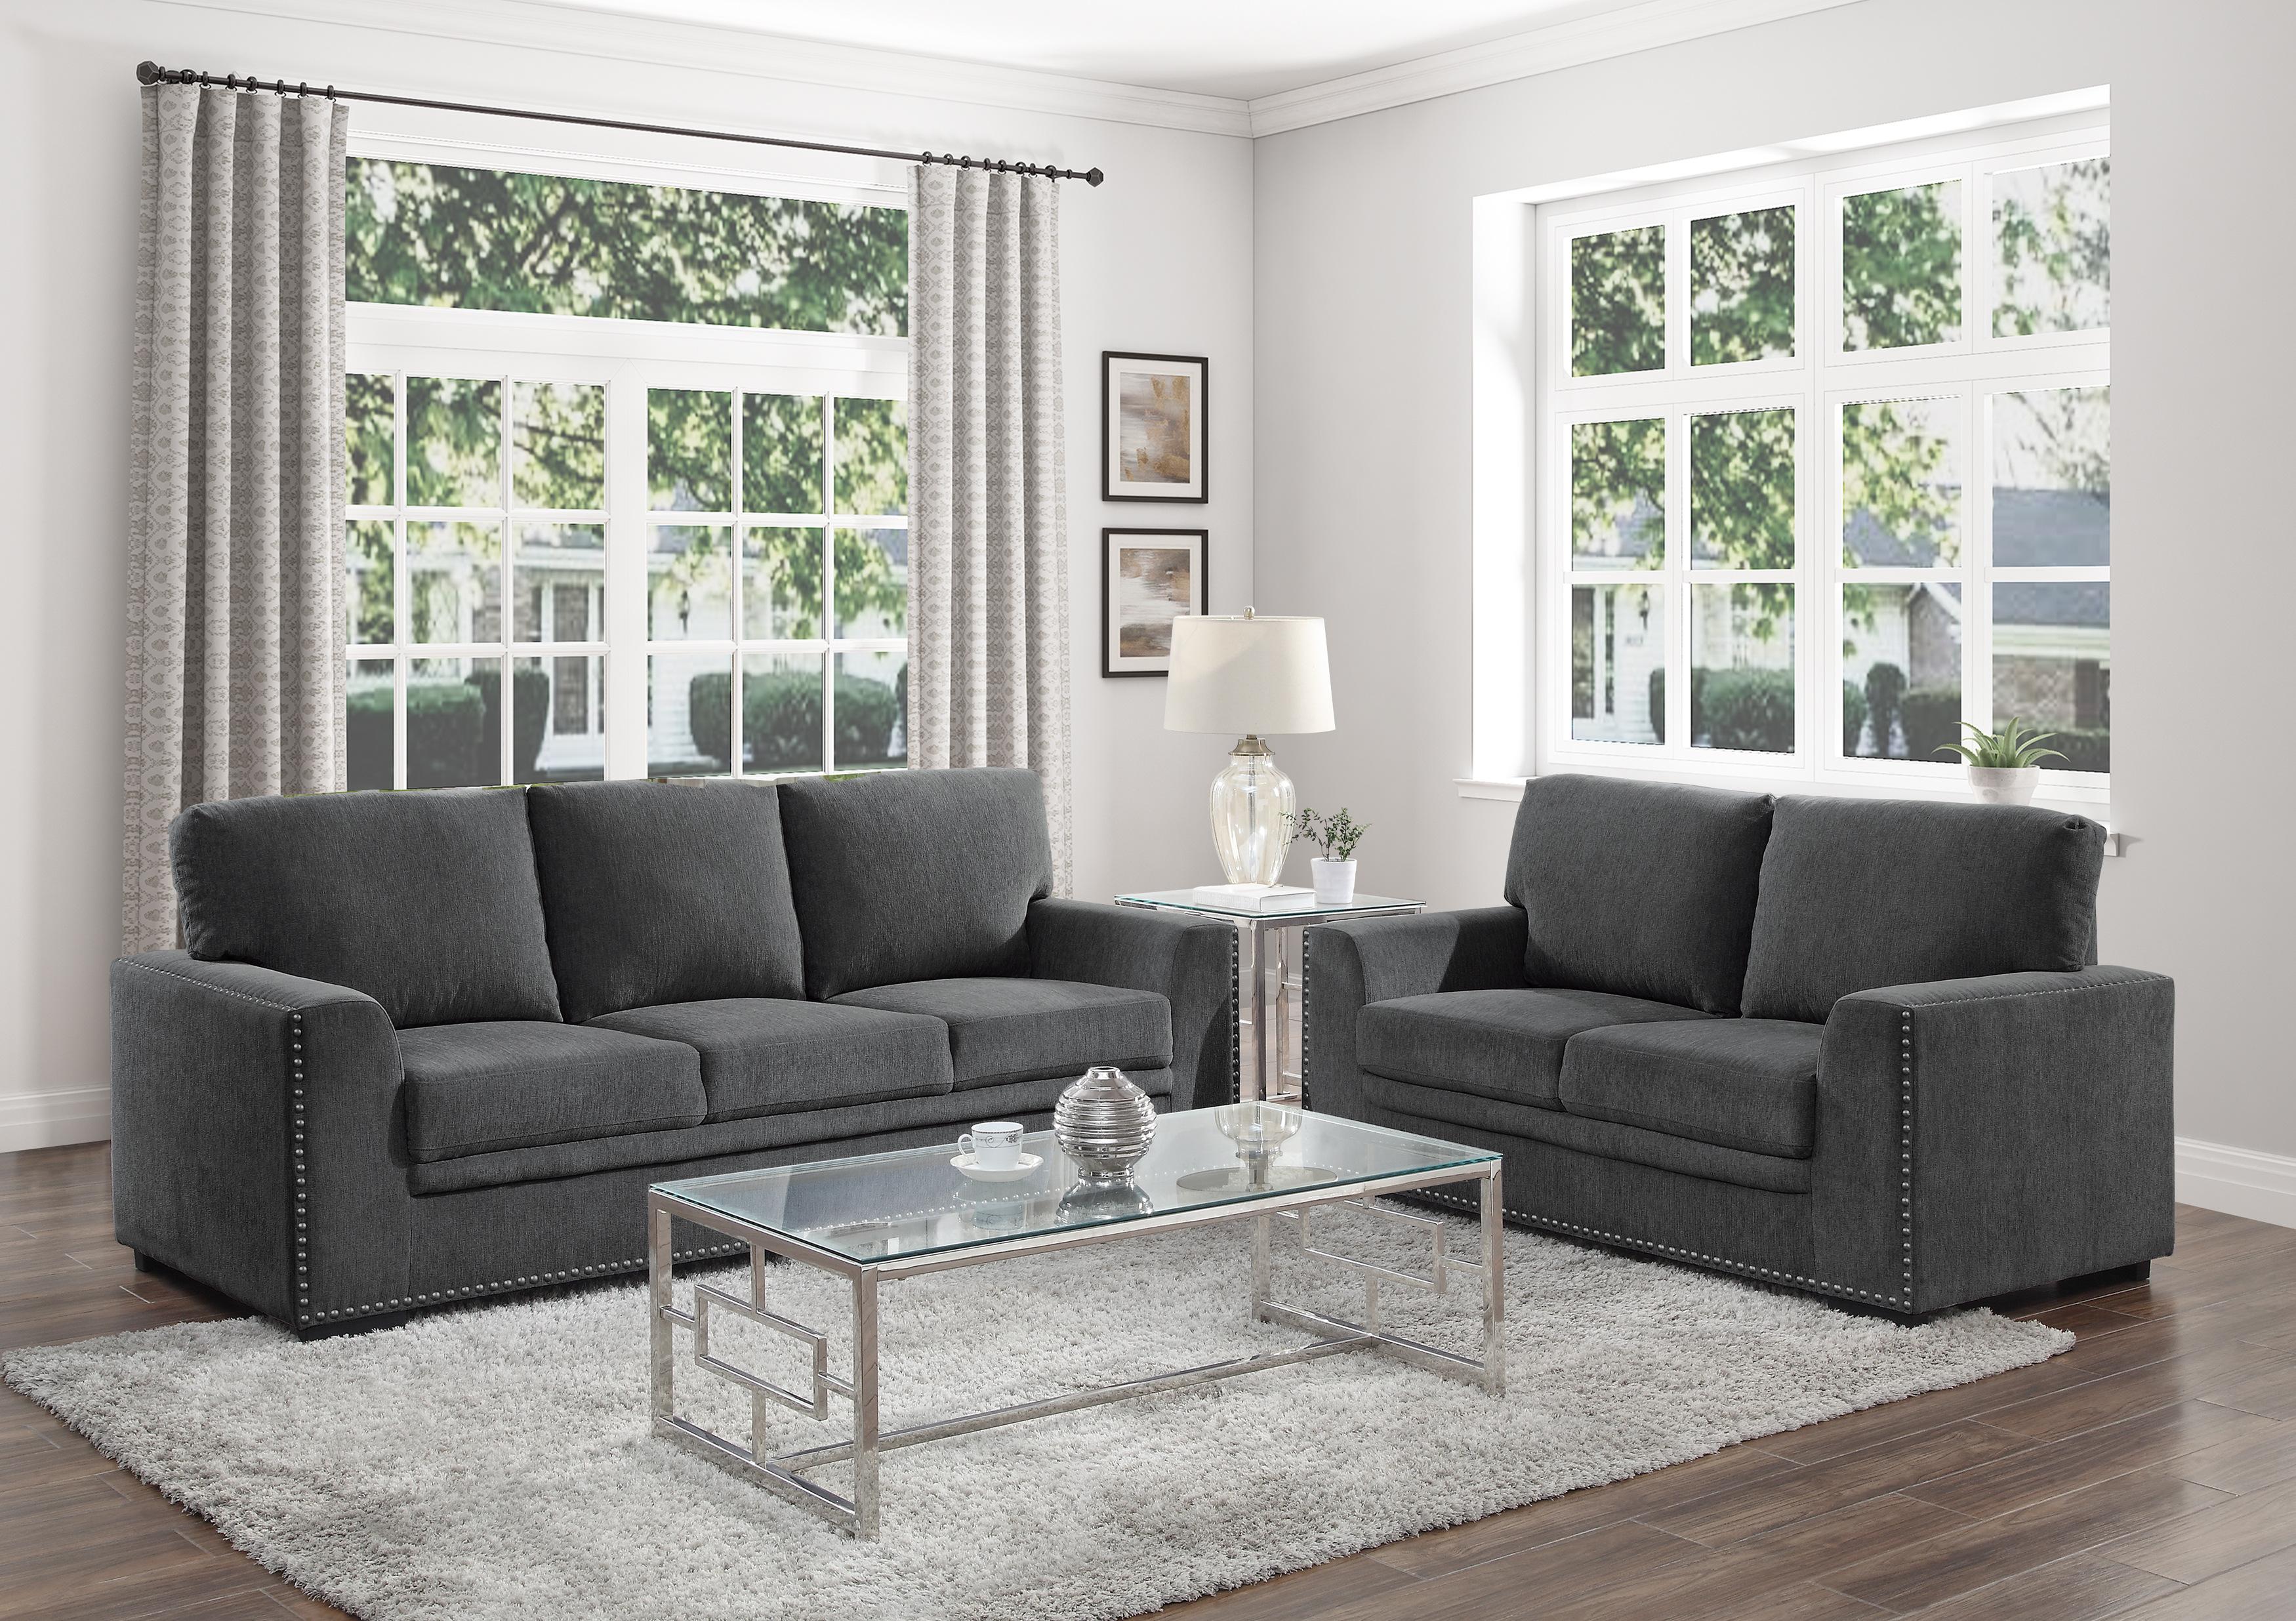 Modern Living Room Set 9468CC-2PC Morelia 9468CC-2PC in Charcoal Chenille